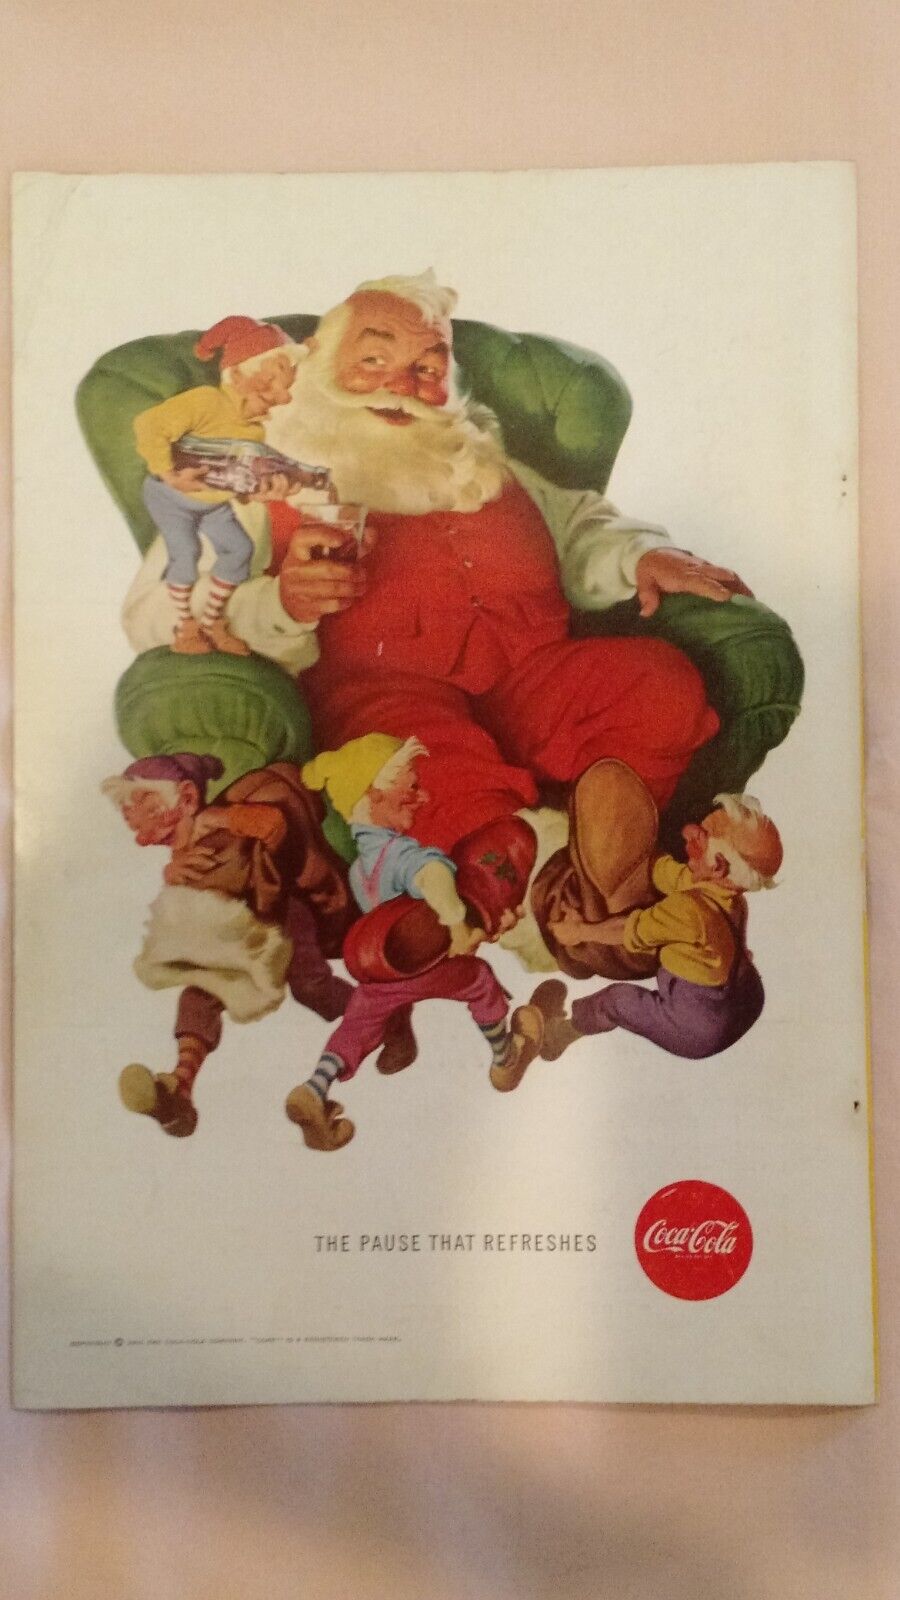 COCA-COLA COKE CHRISTMAS PRINT AD FROM DEC 1960 NAT GEO THE PAUSE THAT REFRESHES